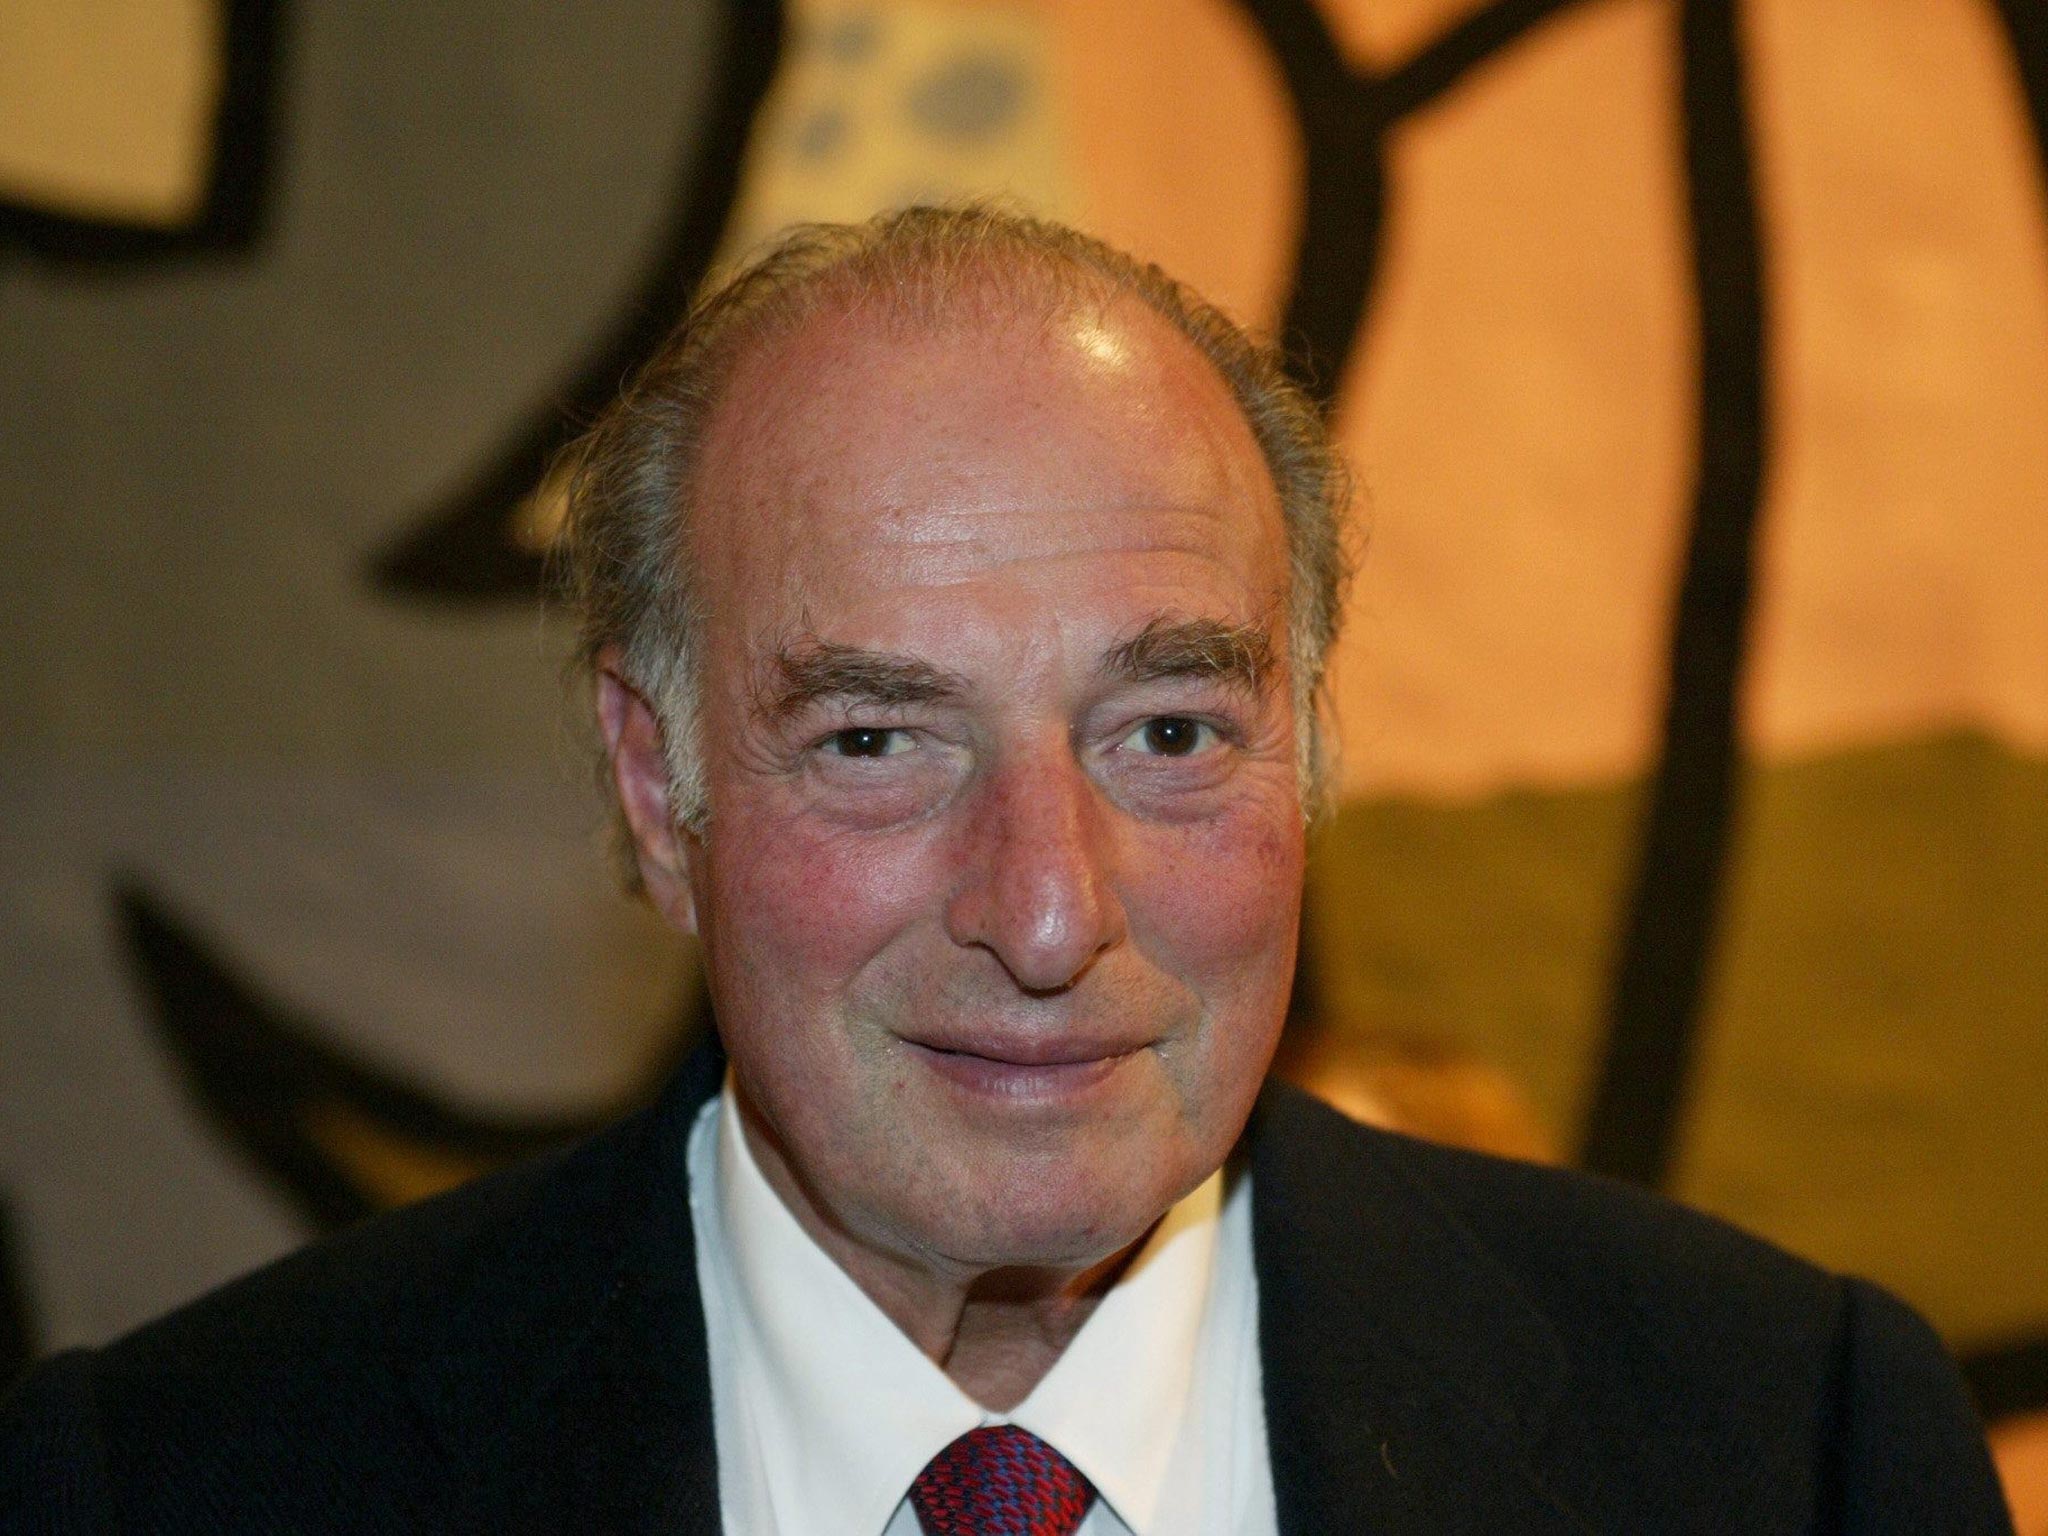 Belgian-born commodities trader Marc Rich and founder of Swiss giant Glencore Xstrata